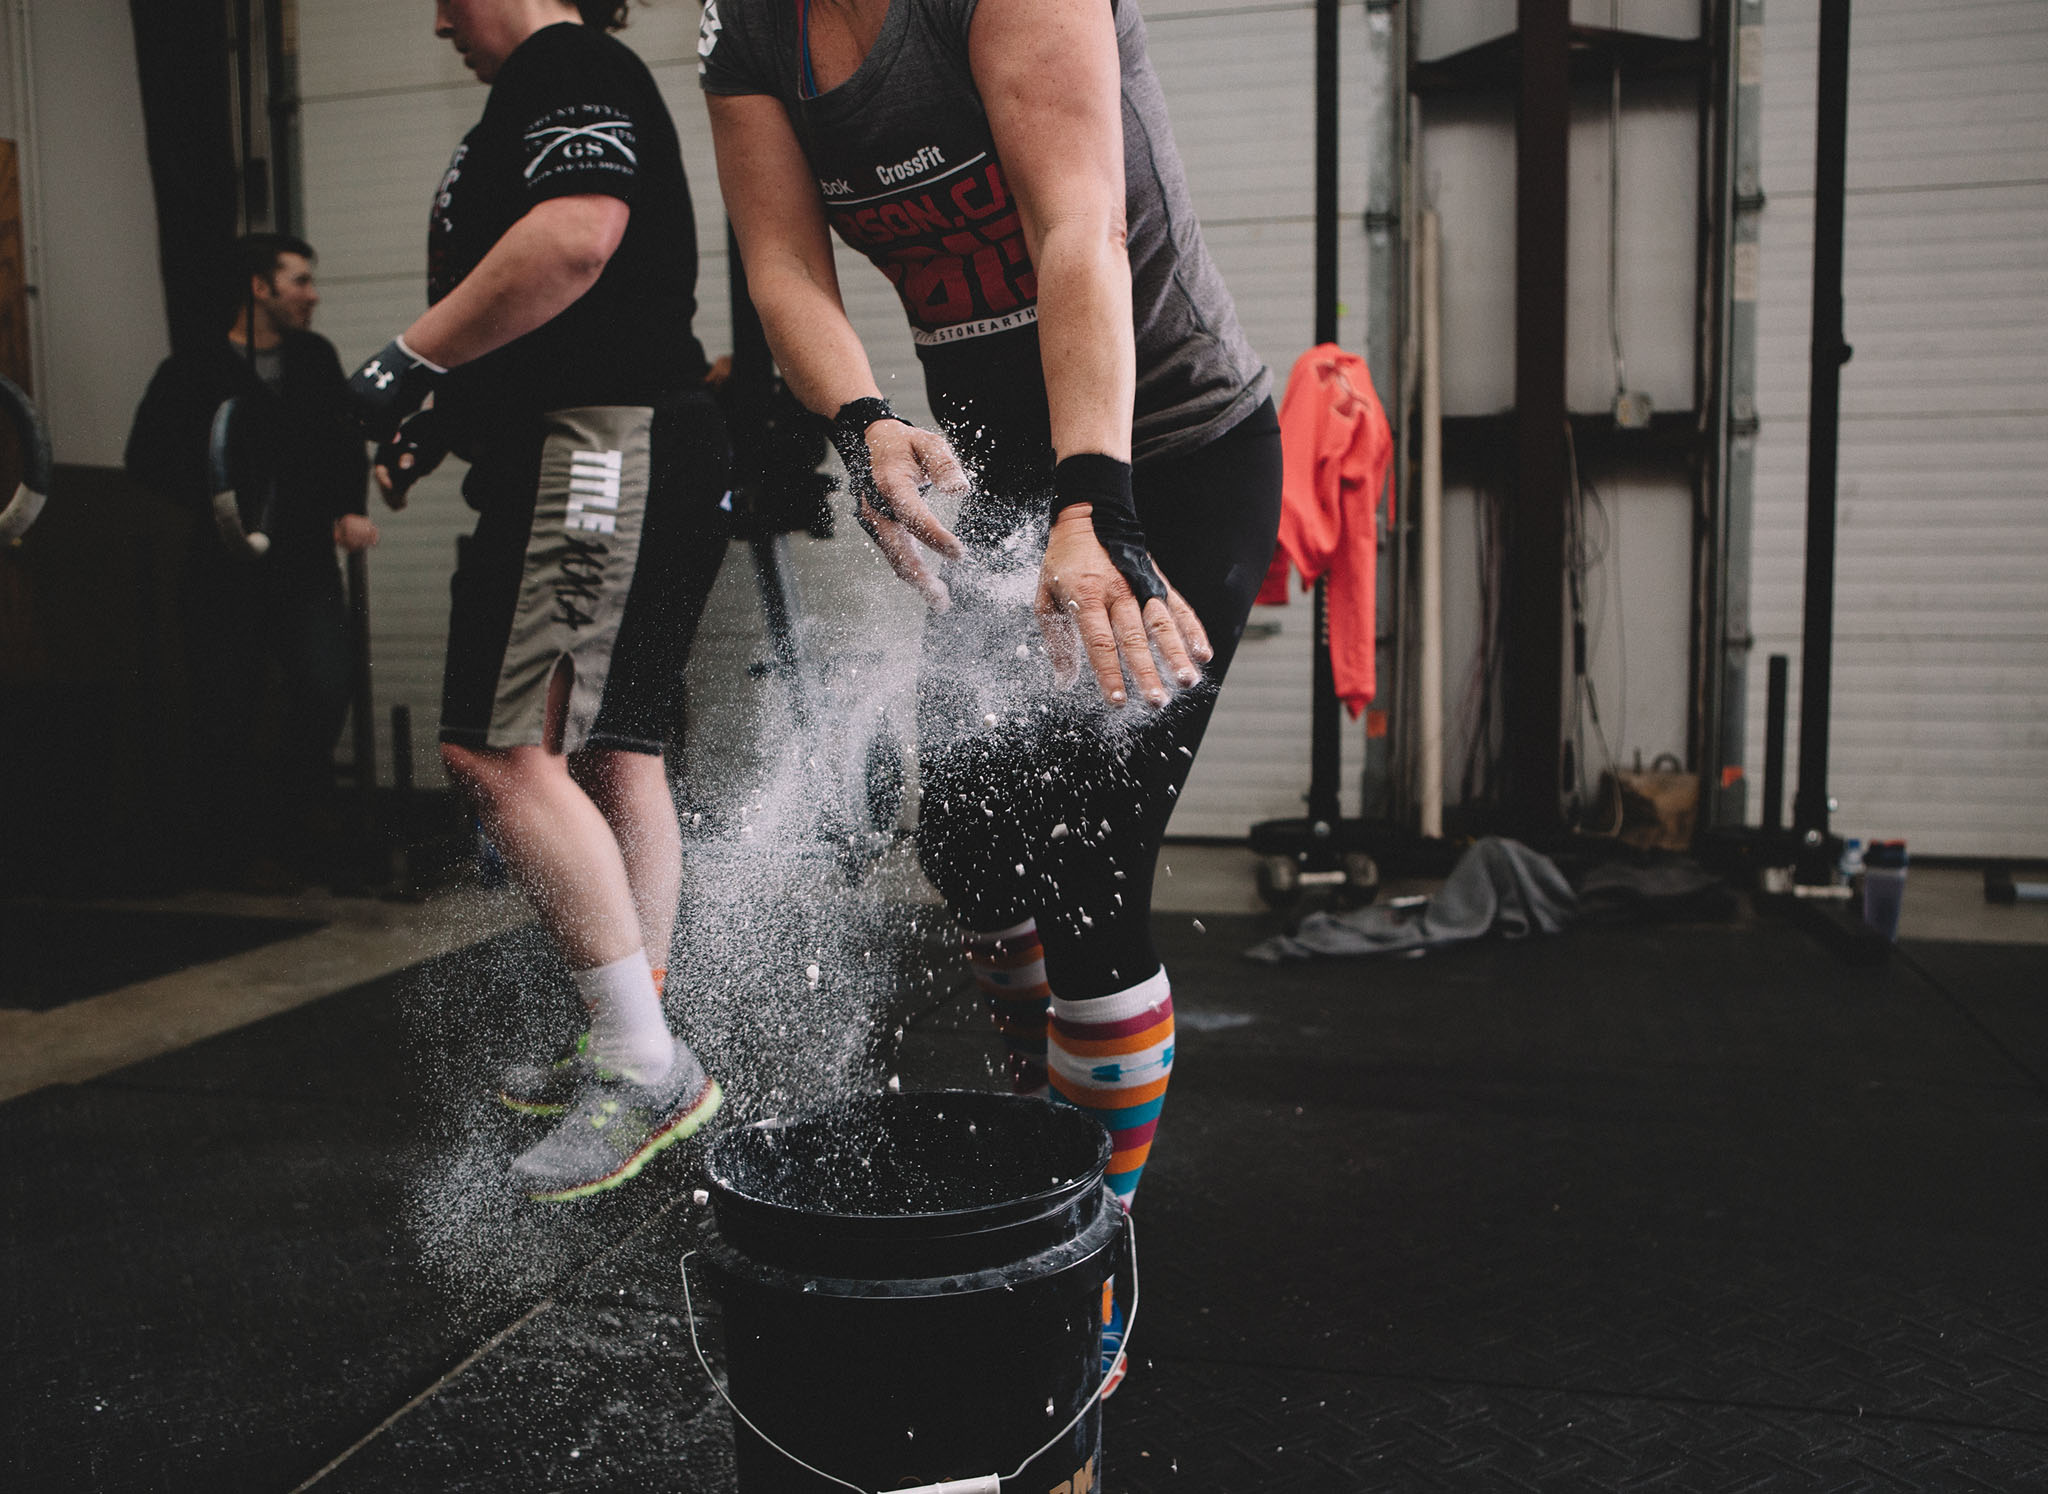 A crossfitter rubs chalk on their hands. Photo taken by LA fitness photographer Hannah Dunsirn.